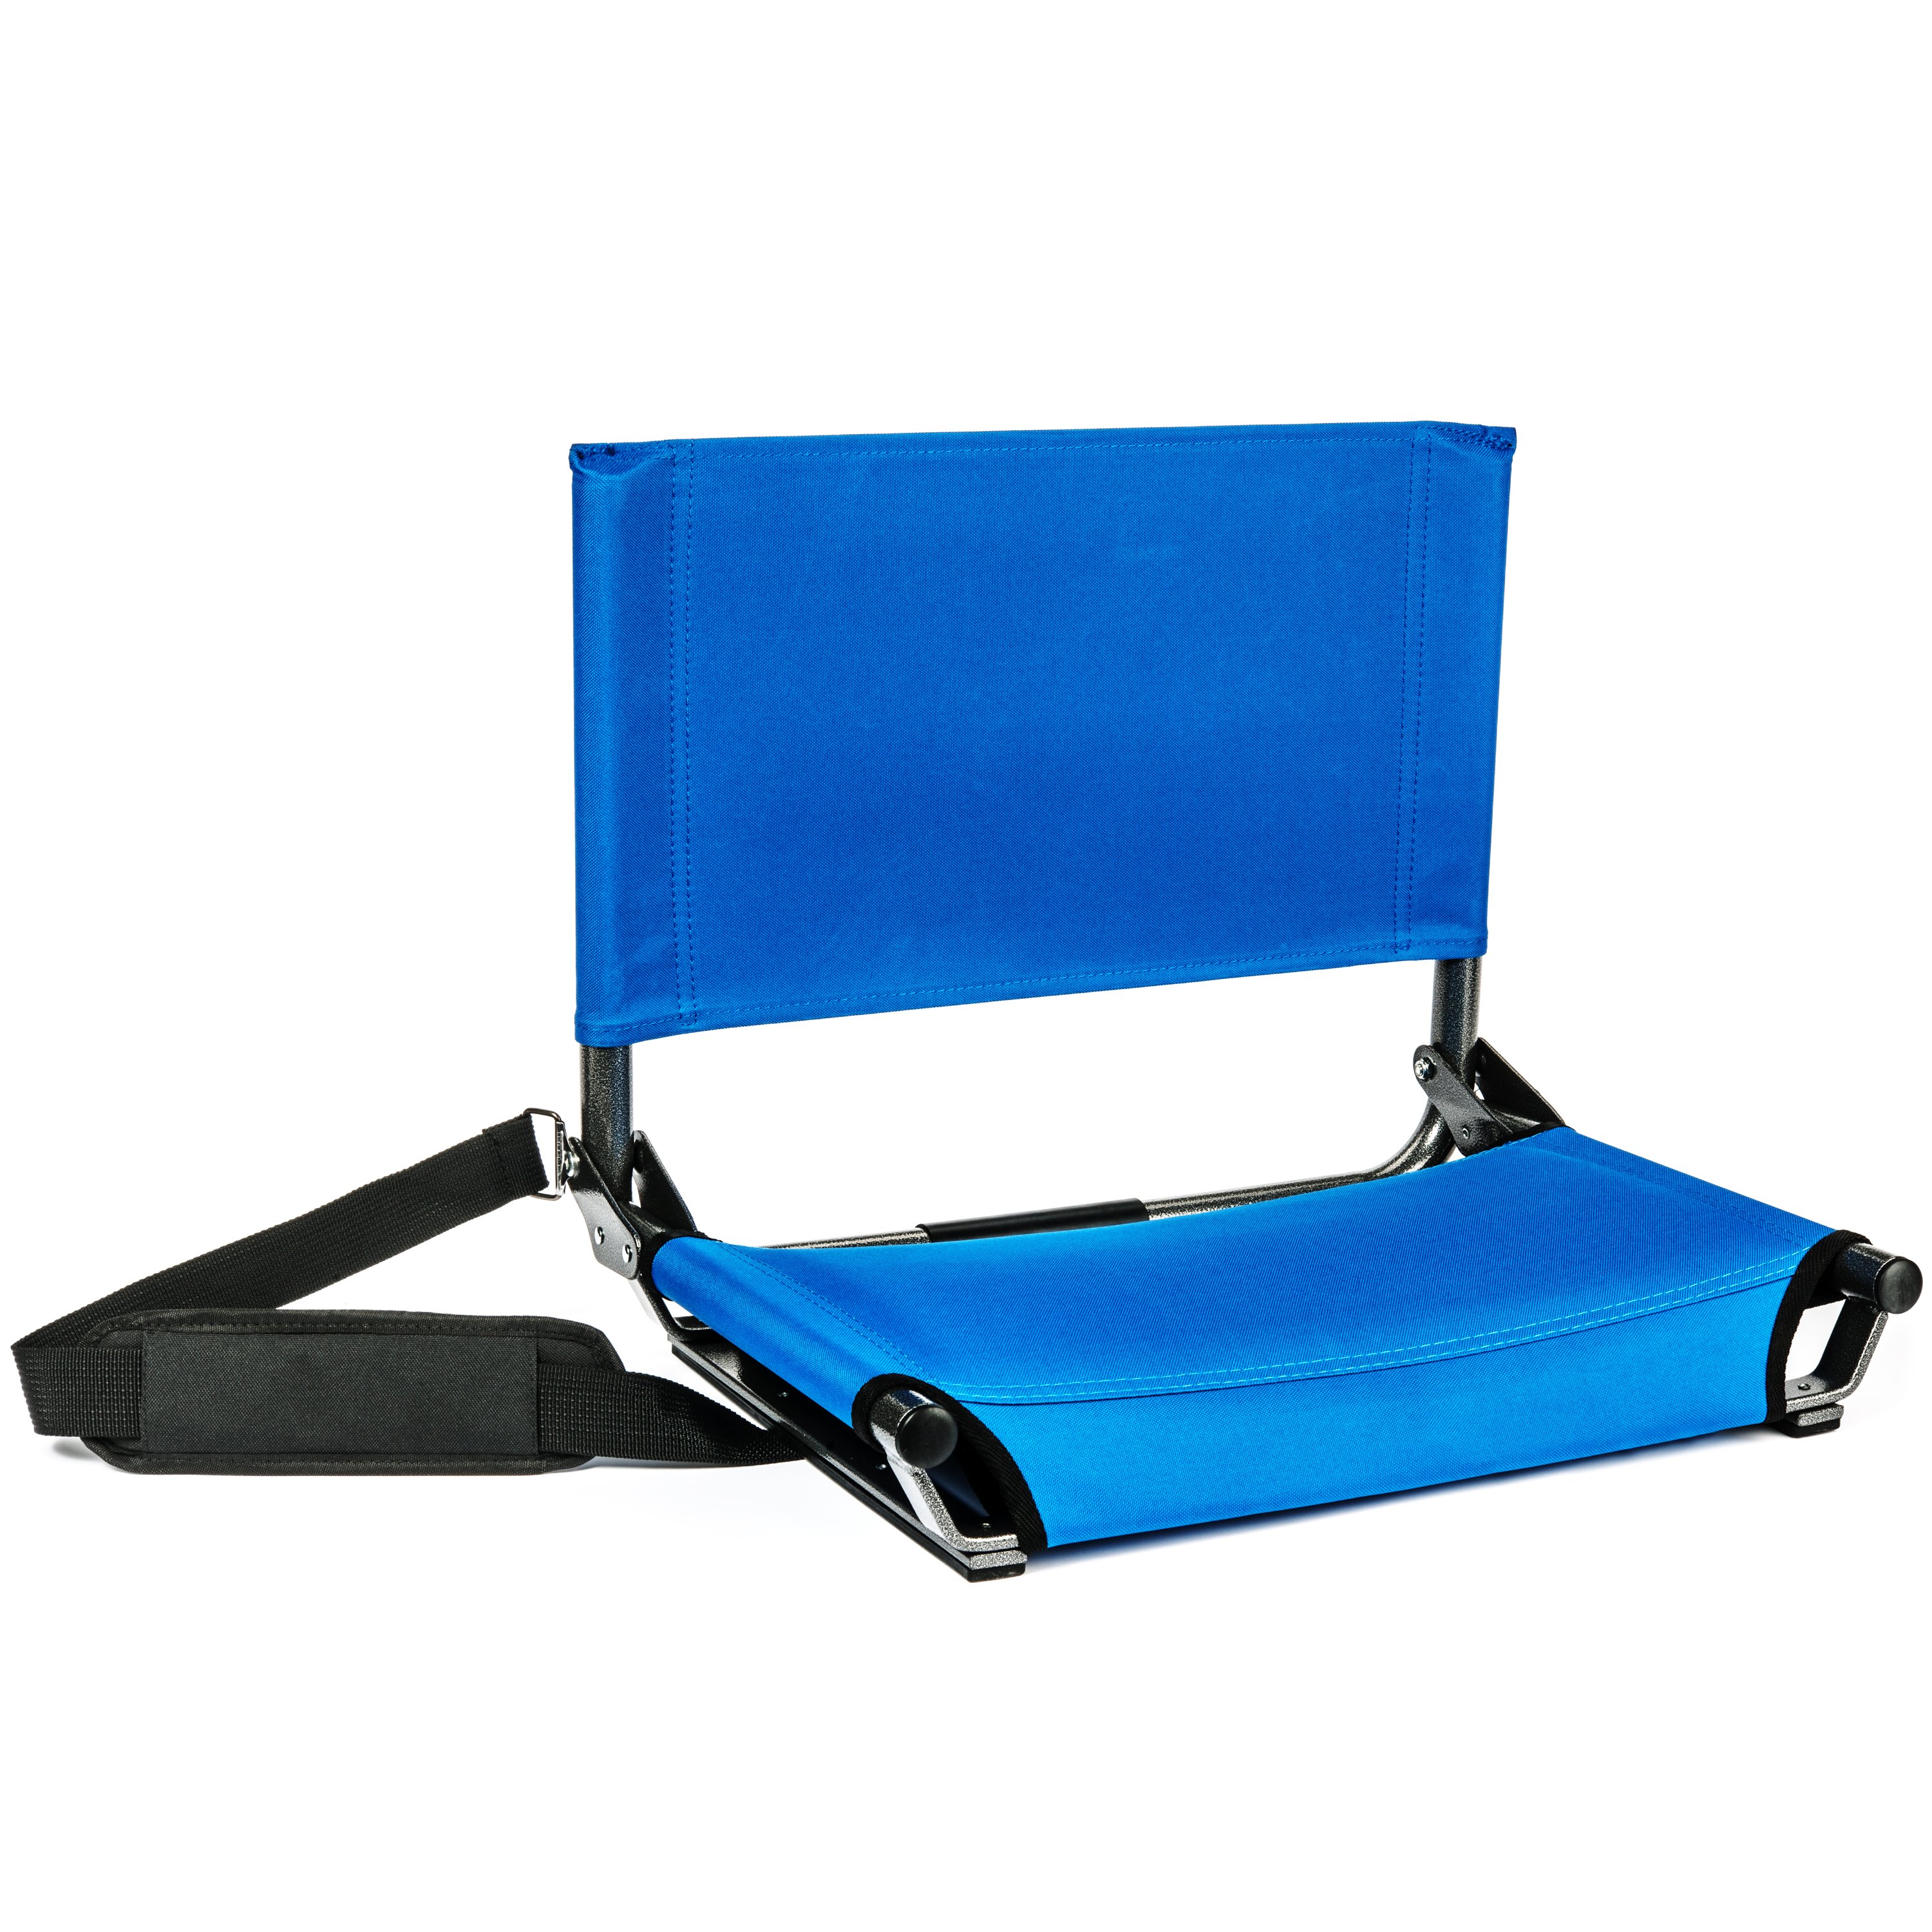 Bleacher Seats with Padded Active Foam Backs and Cushion OSPORTIS Stadium Seats for Bleachers Portable Stadium Seats with Back Support and Shoulder Strap